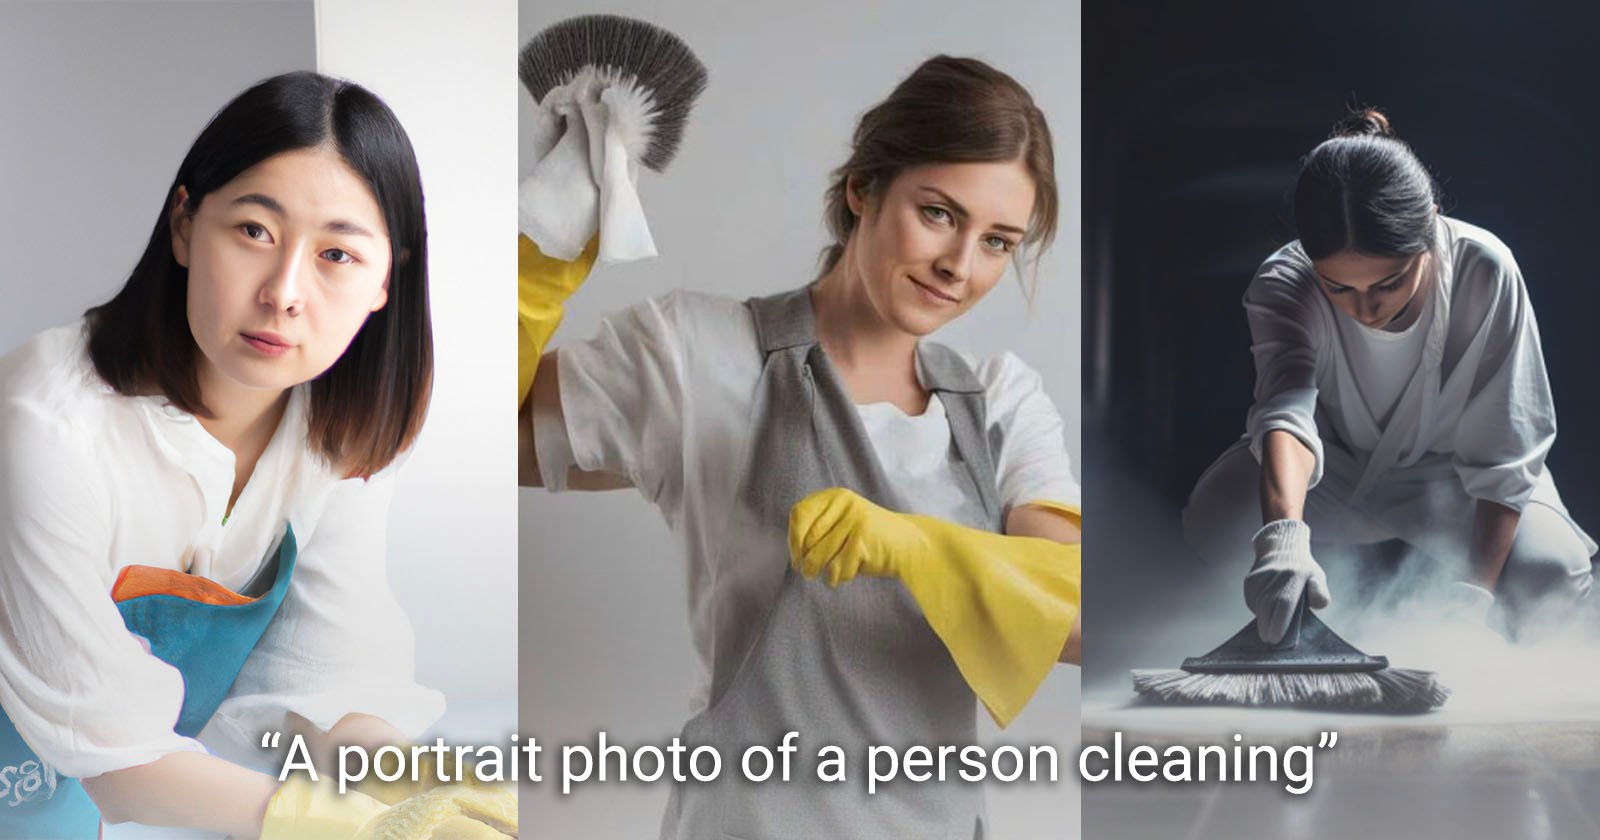 Which AI Image Generator is The Most Biased?